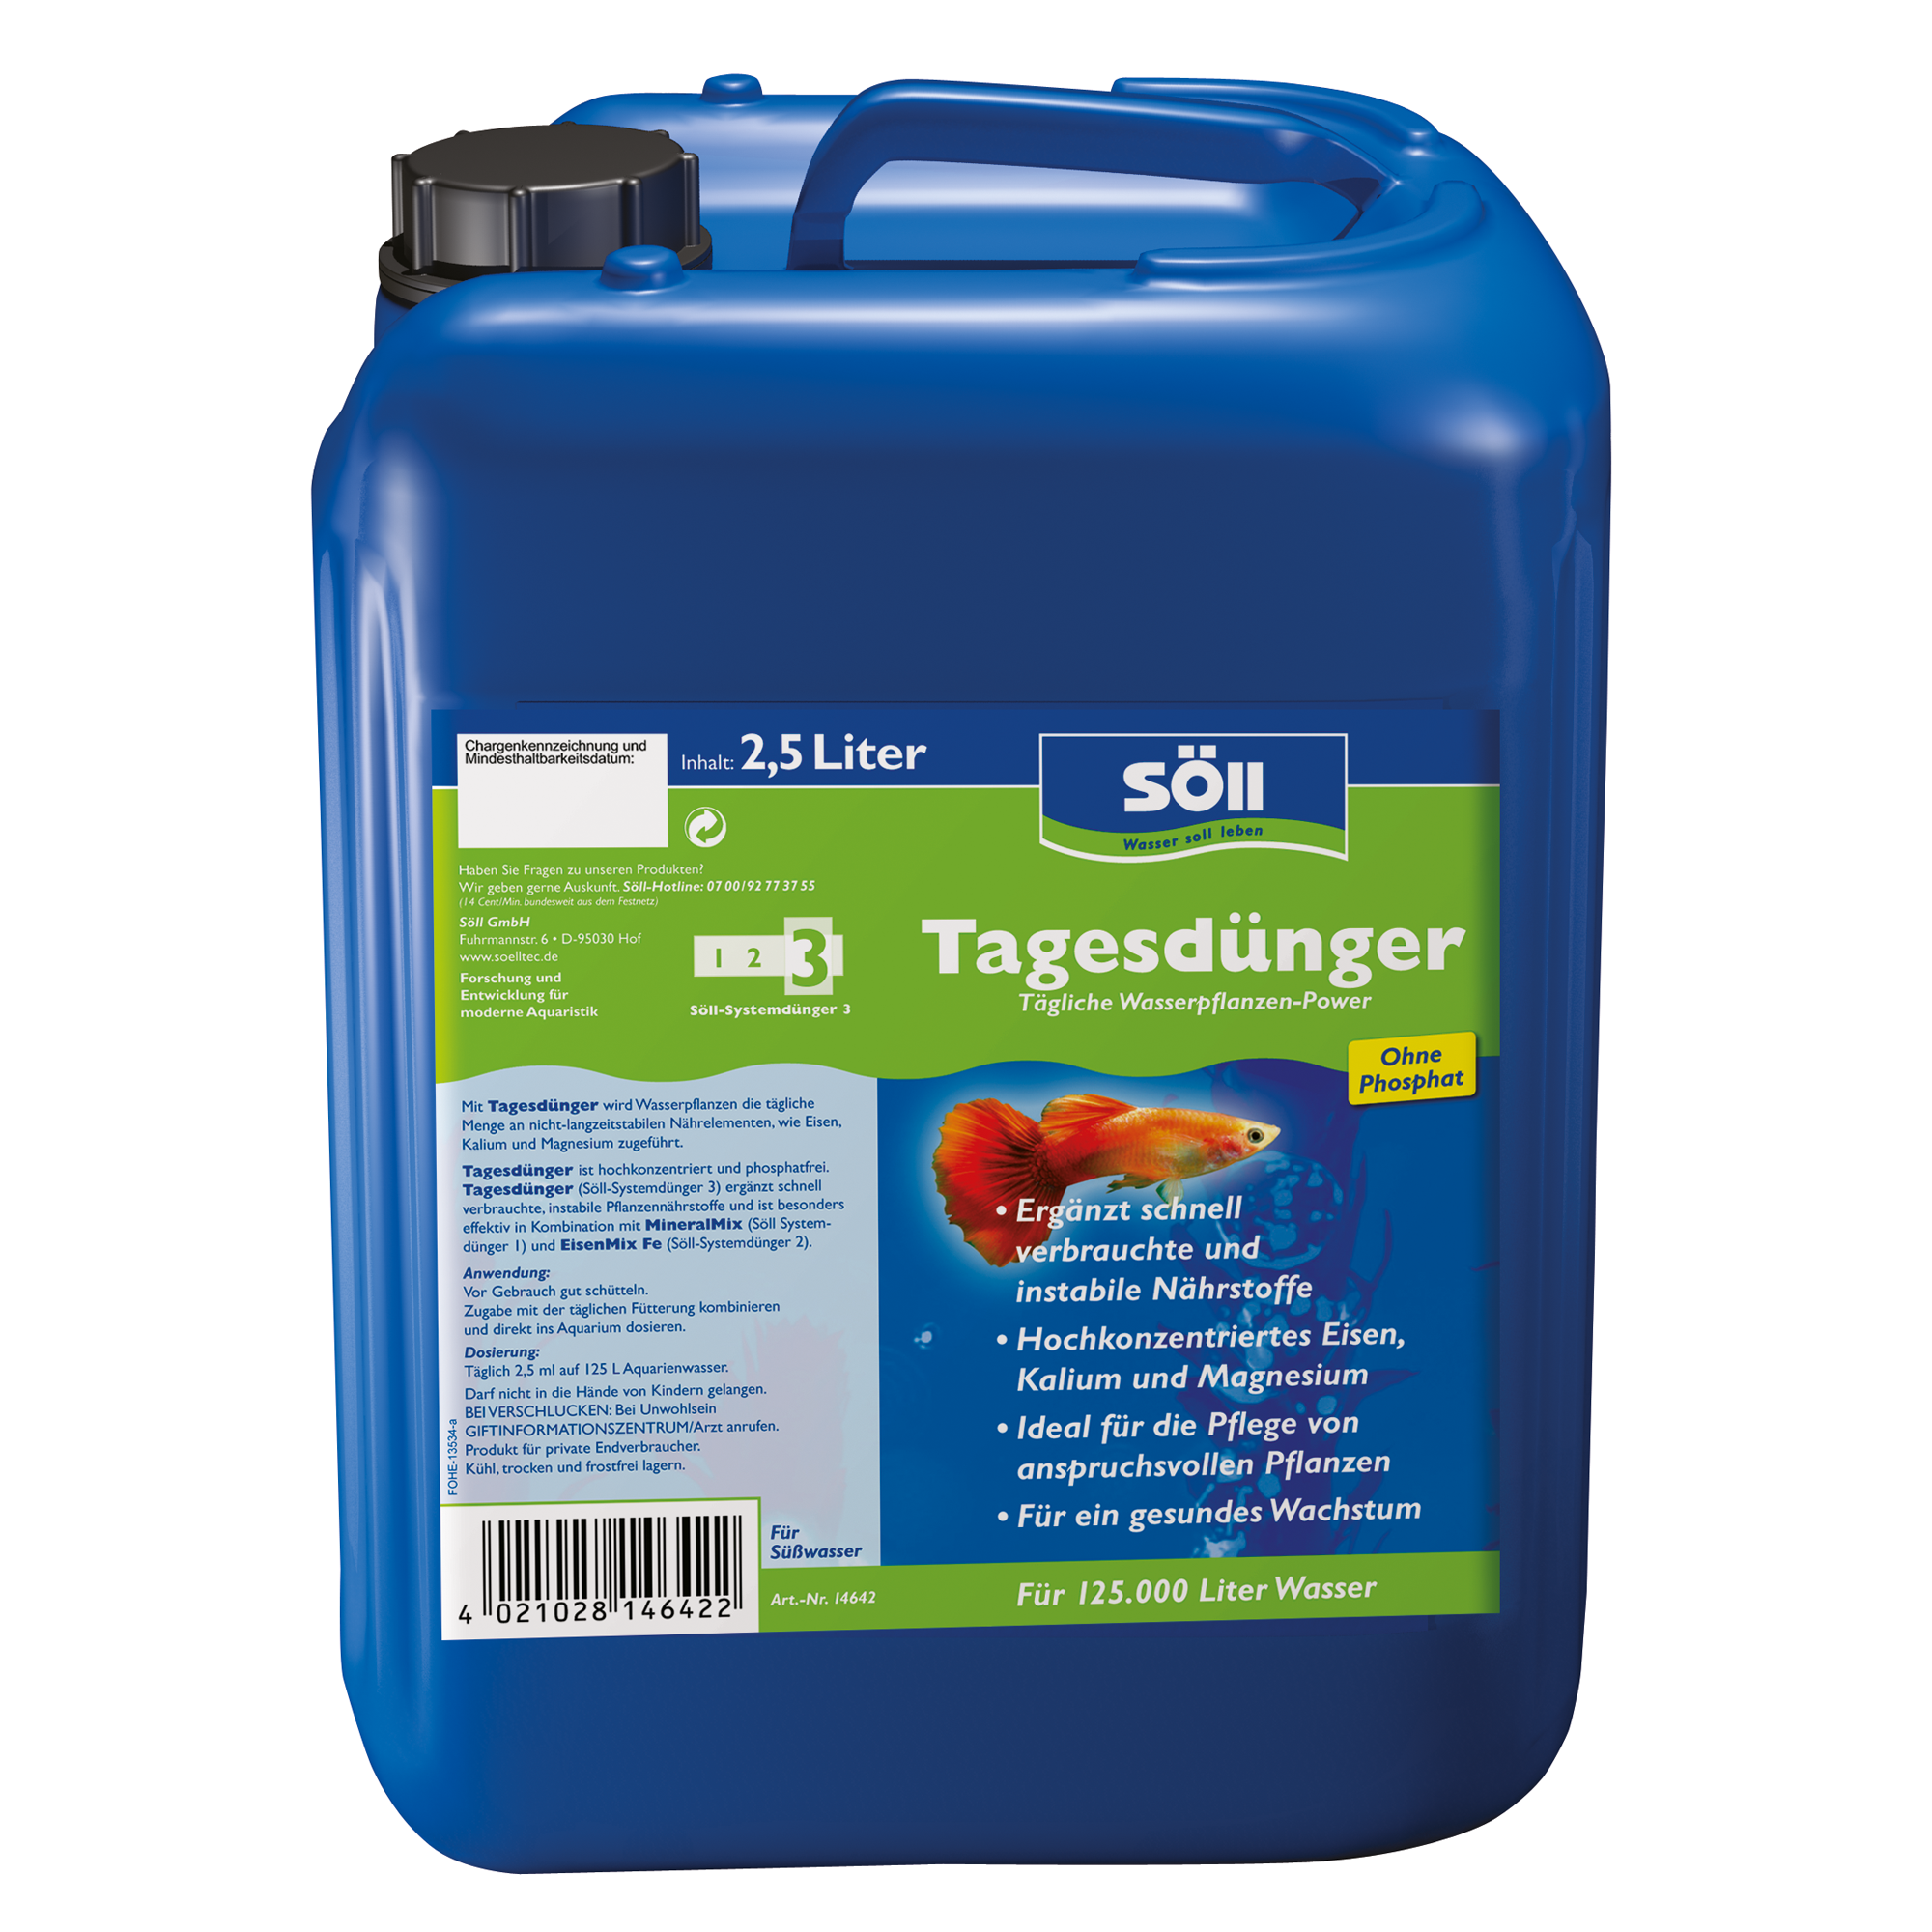 Tagesdünger 2,5 l + product picture